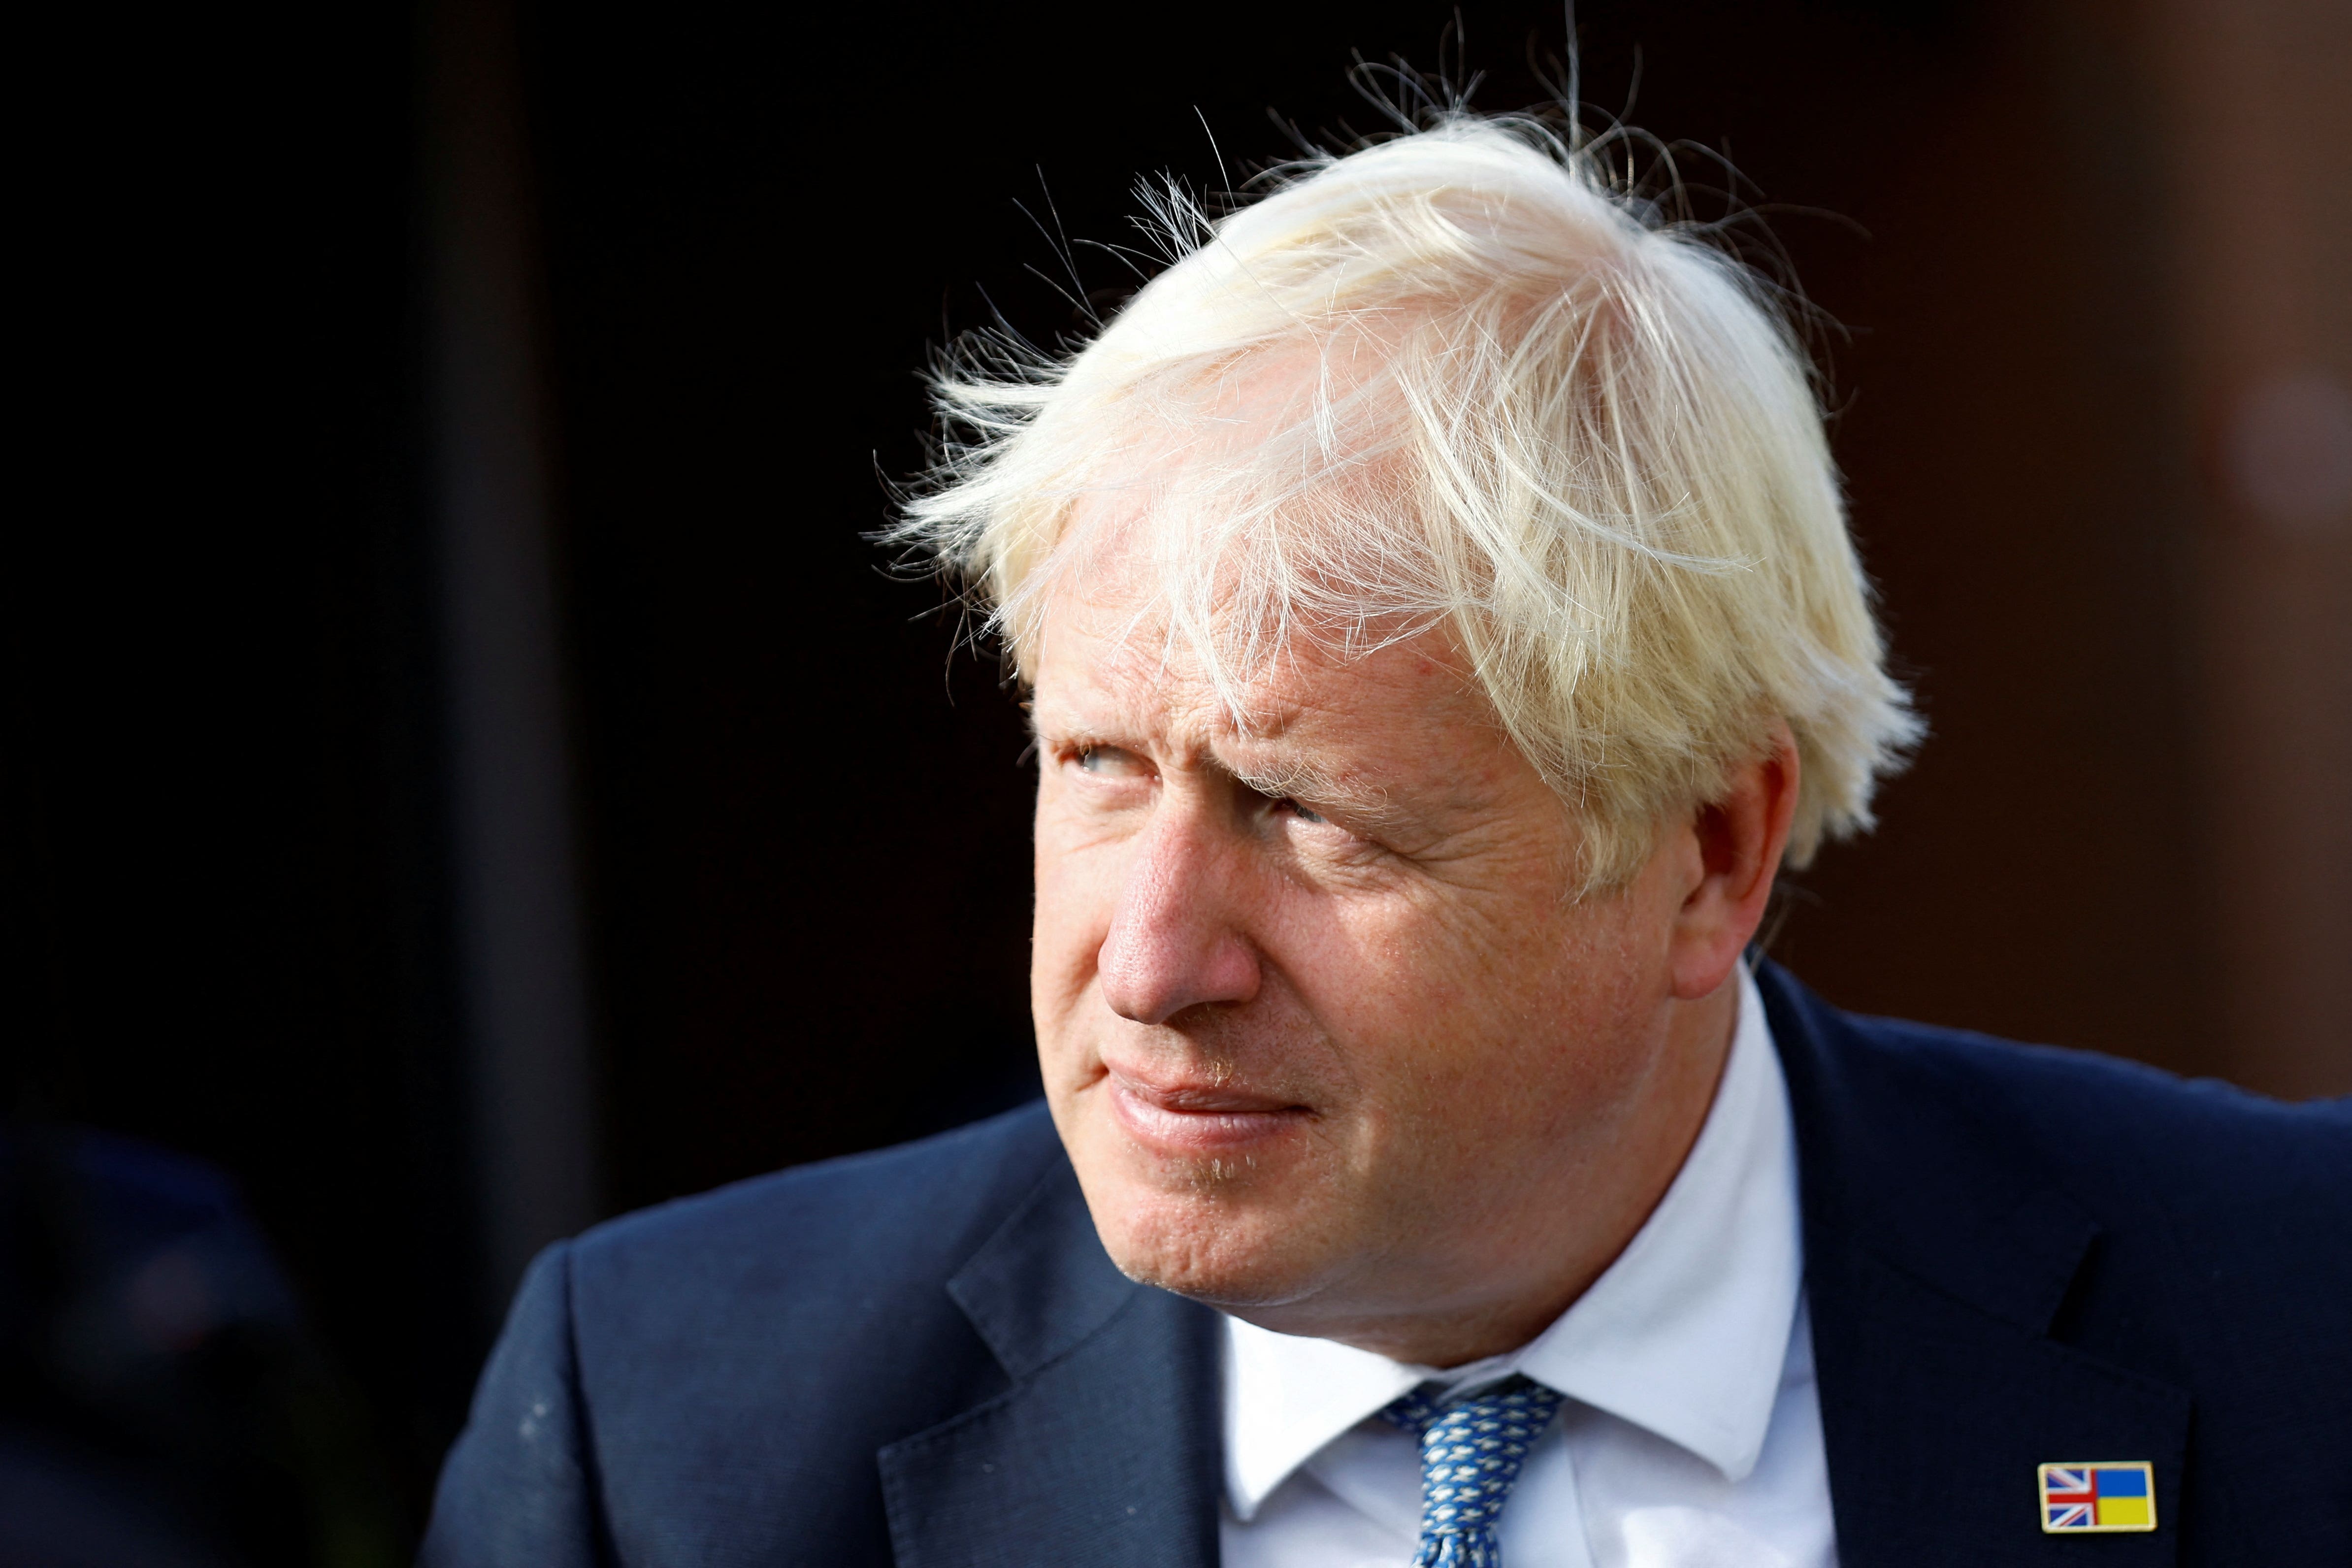 Johnson is embroiled in a row with Sunak over names not being included on peerage list